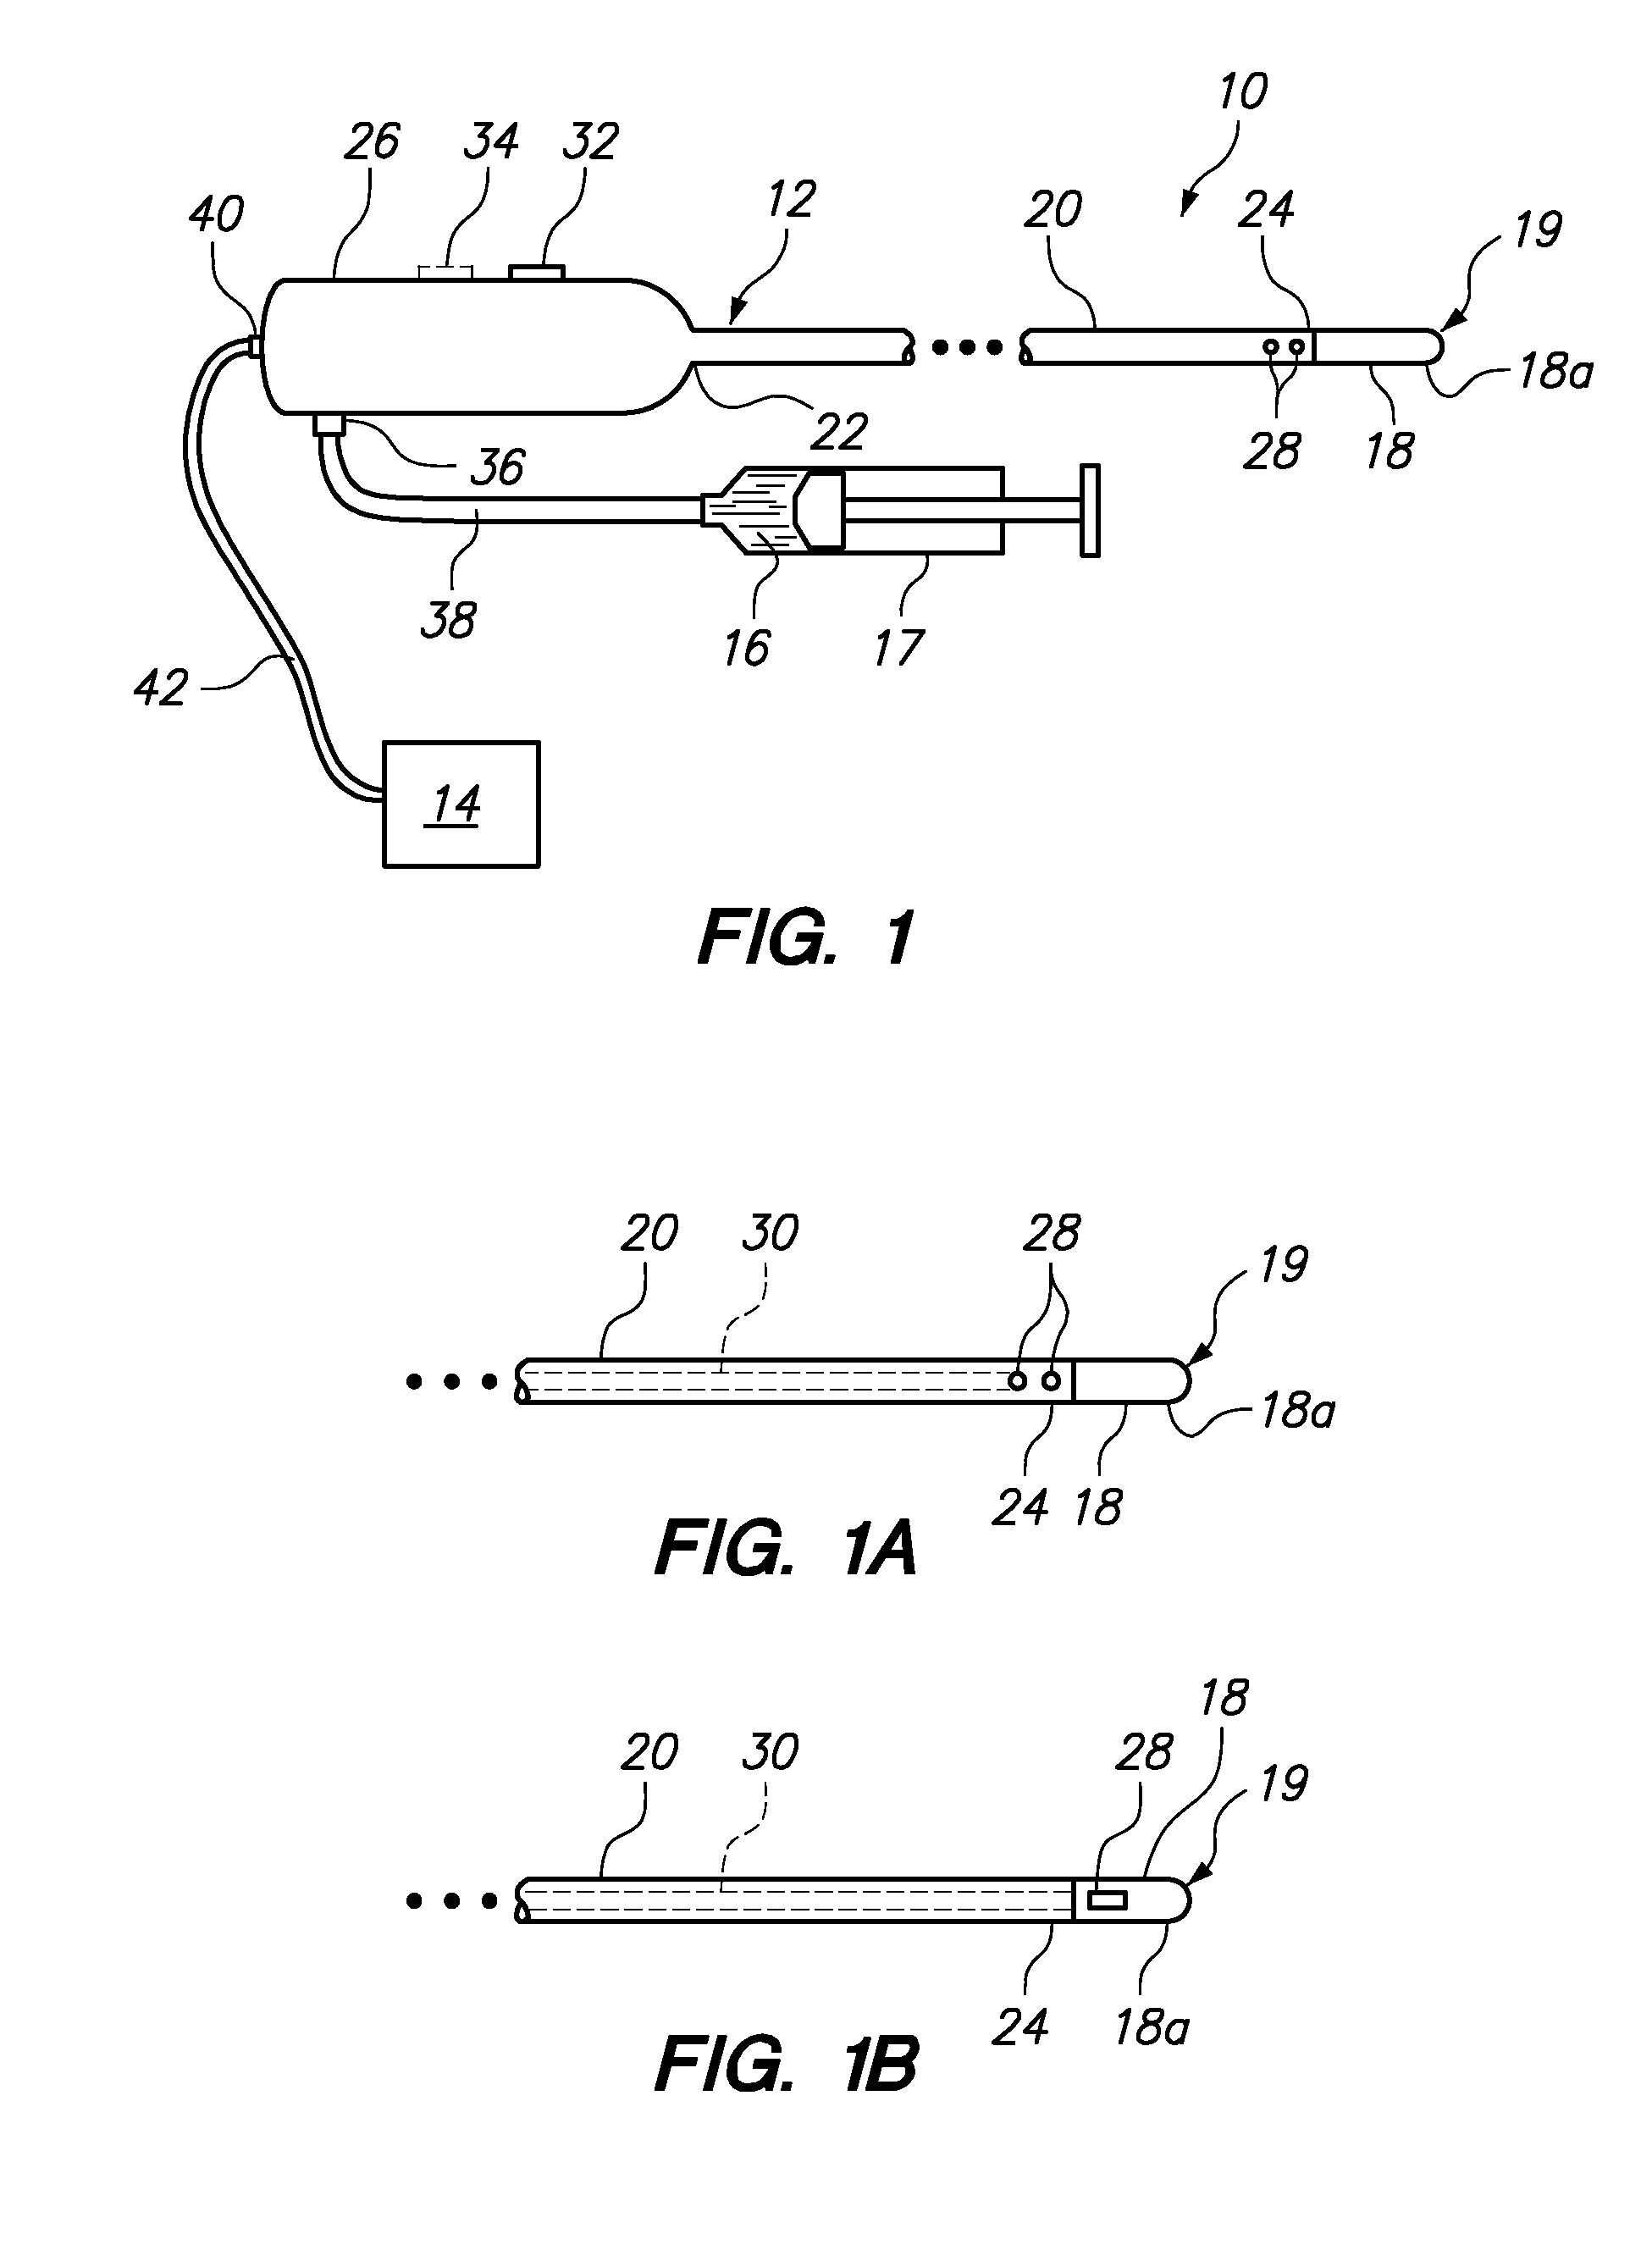 Method and apparatus for tissue resection